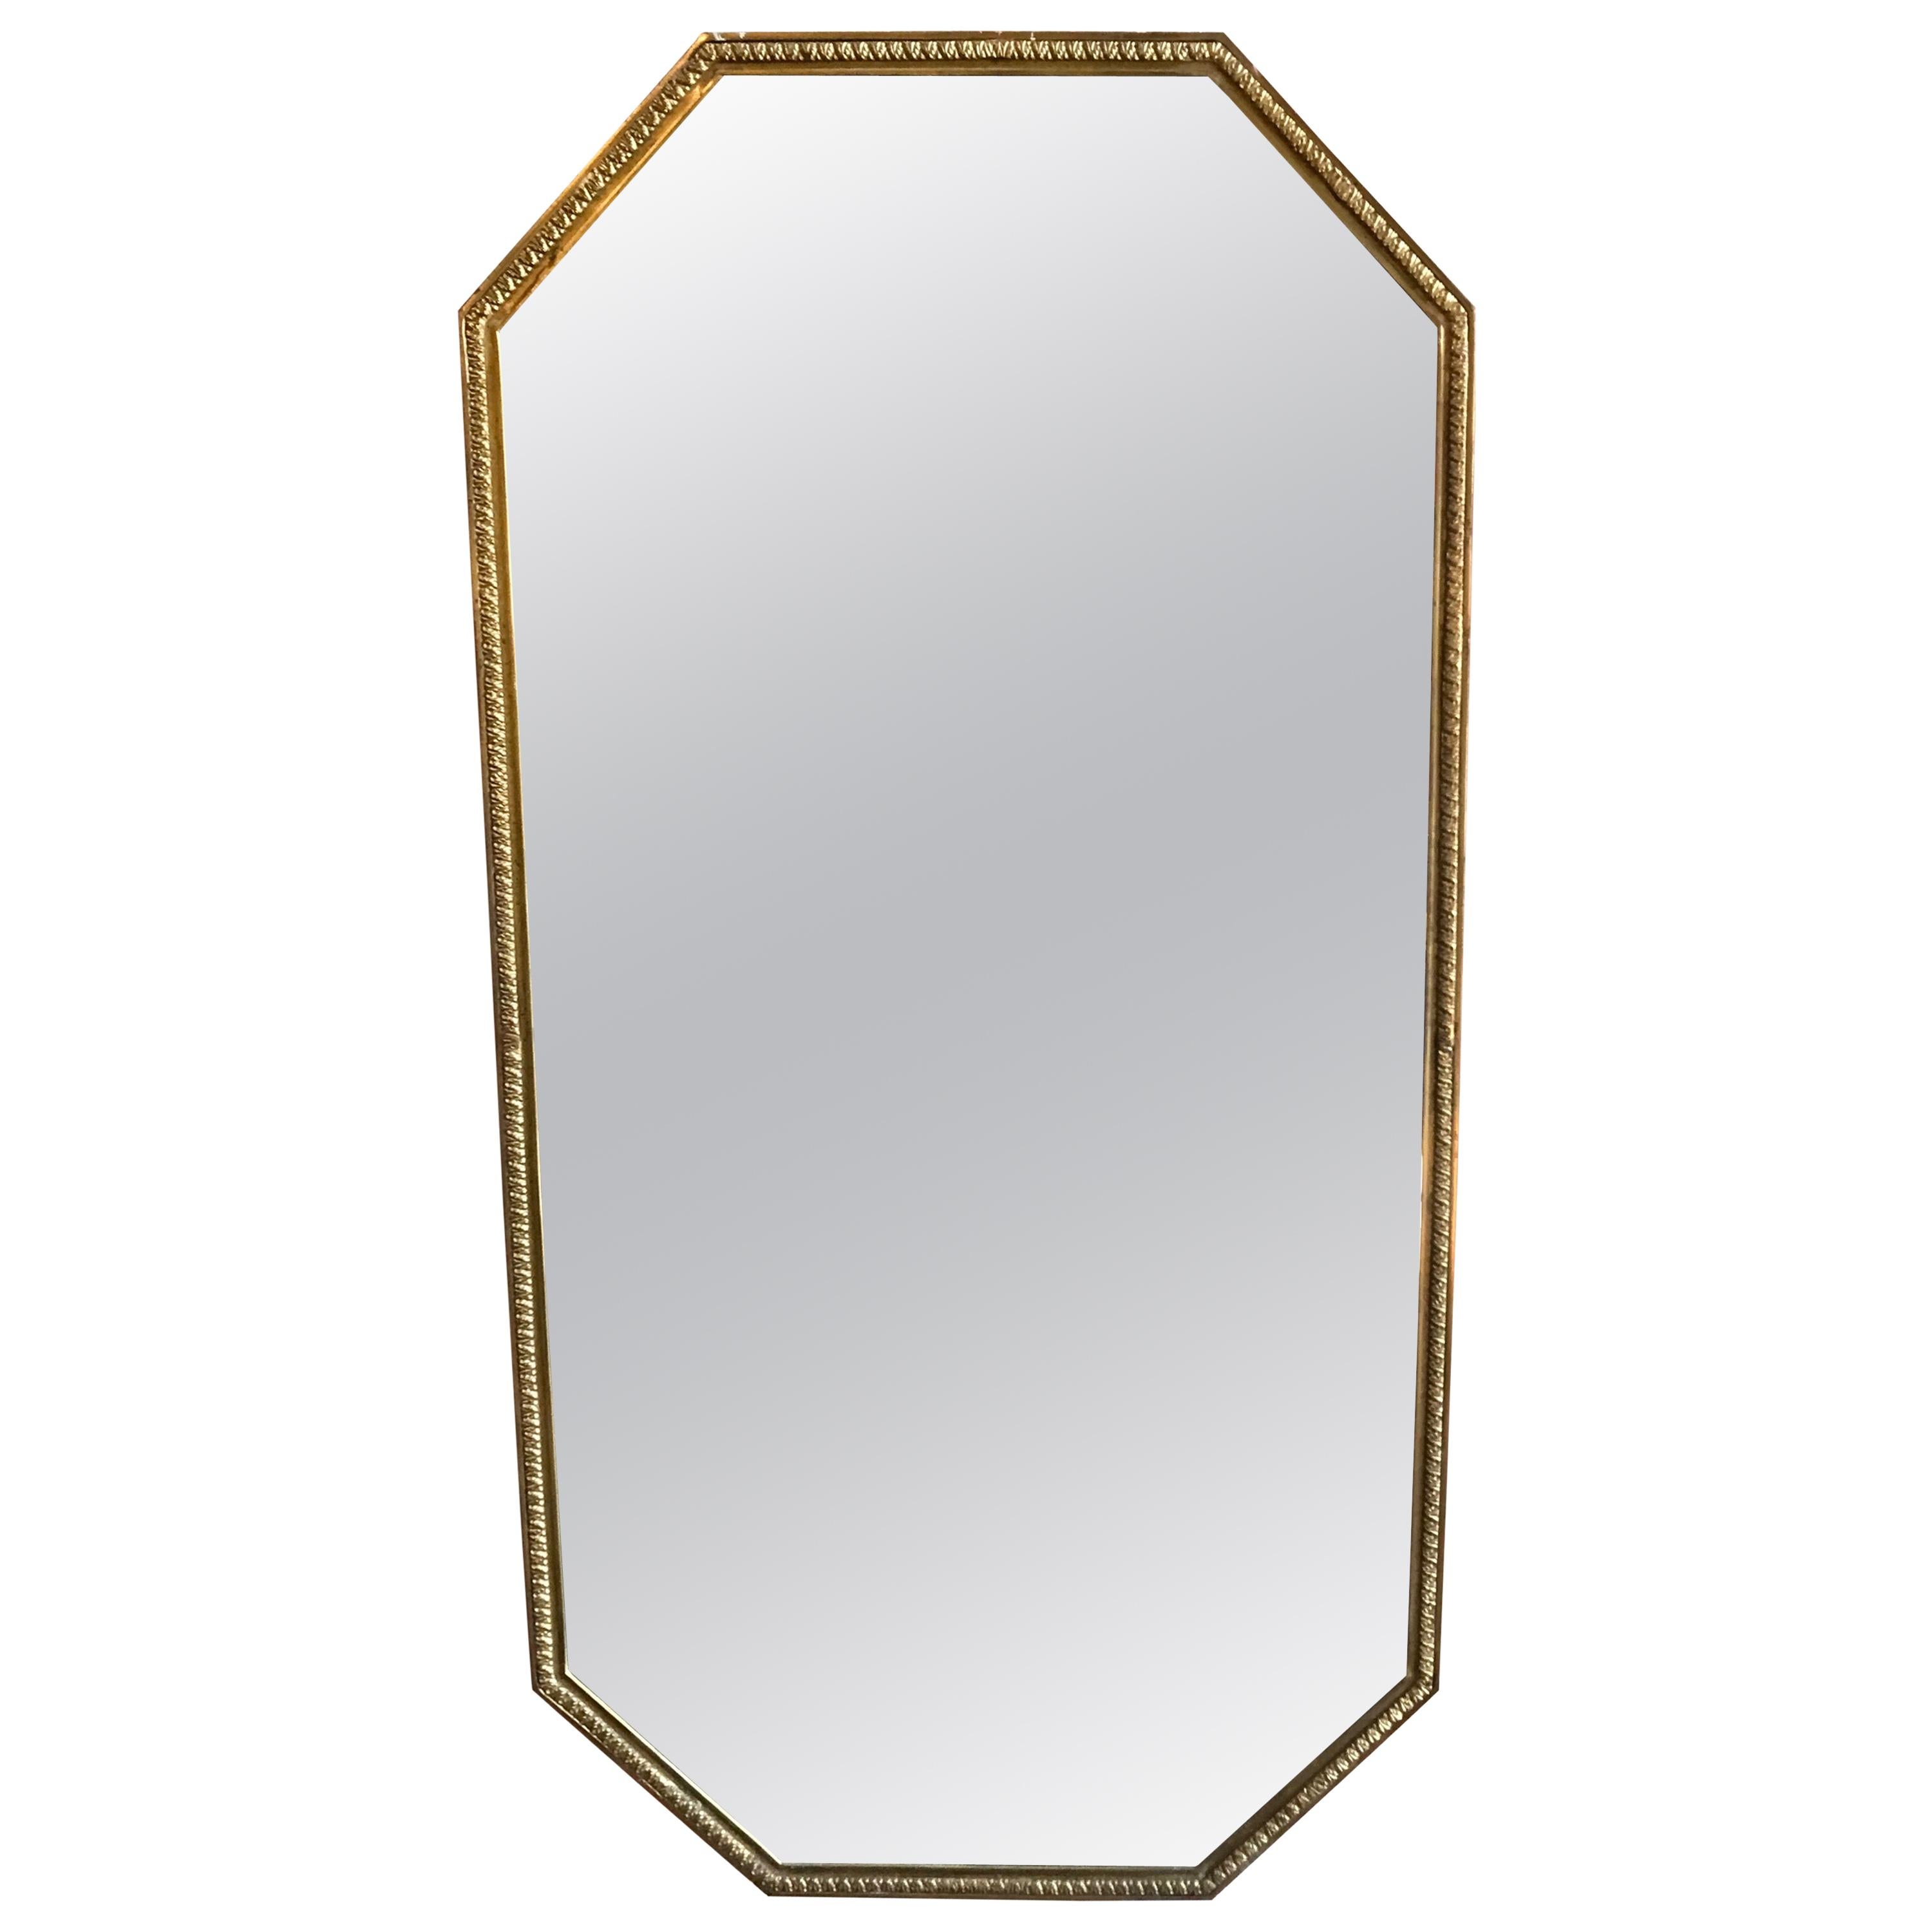 Midcentury Polygonal Thick Brass Framed Wall Mirror, Italy, 1950s